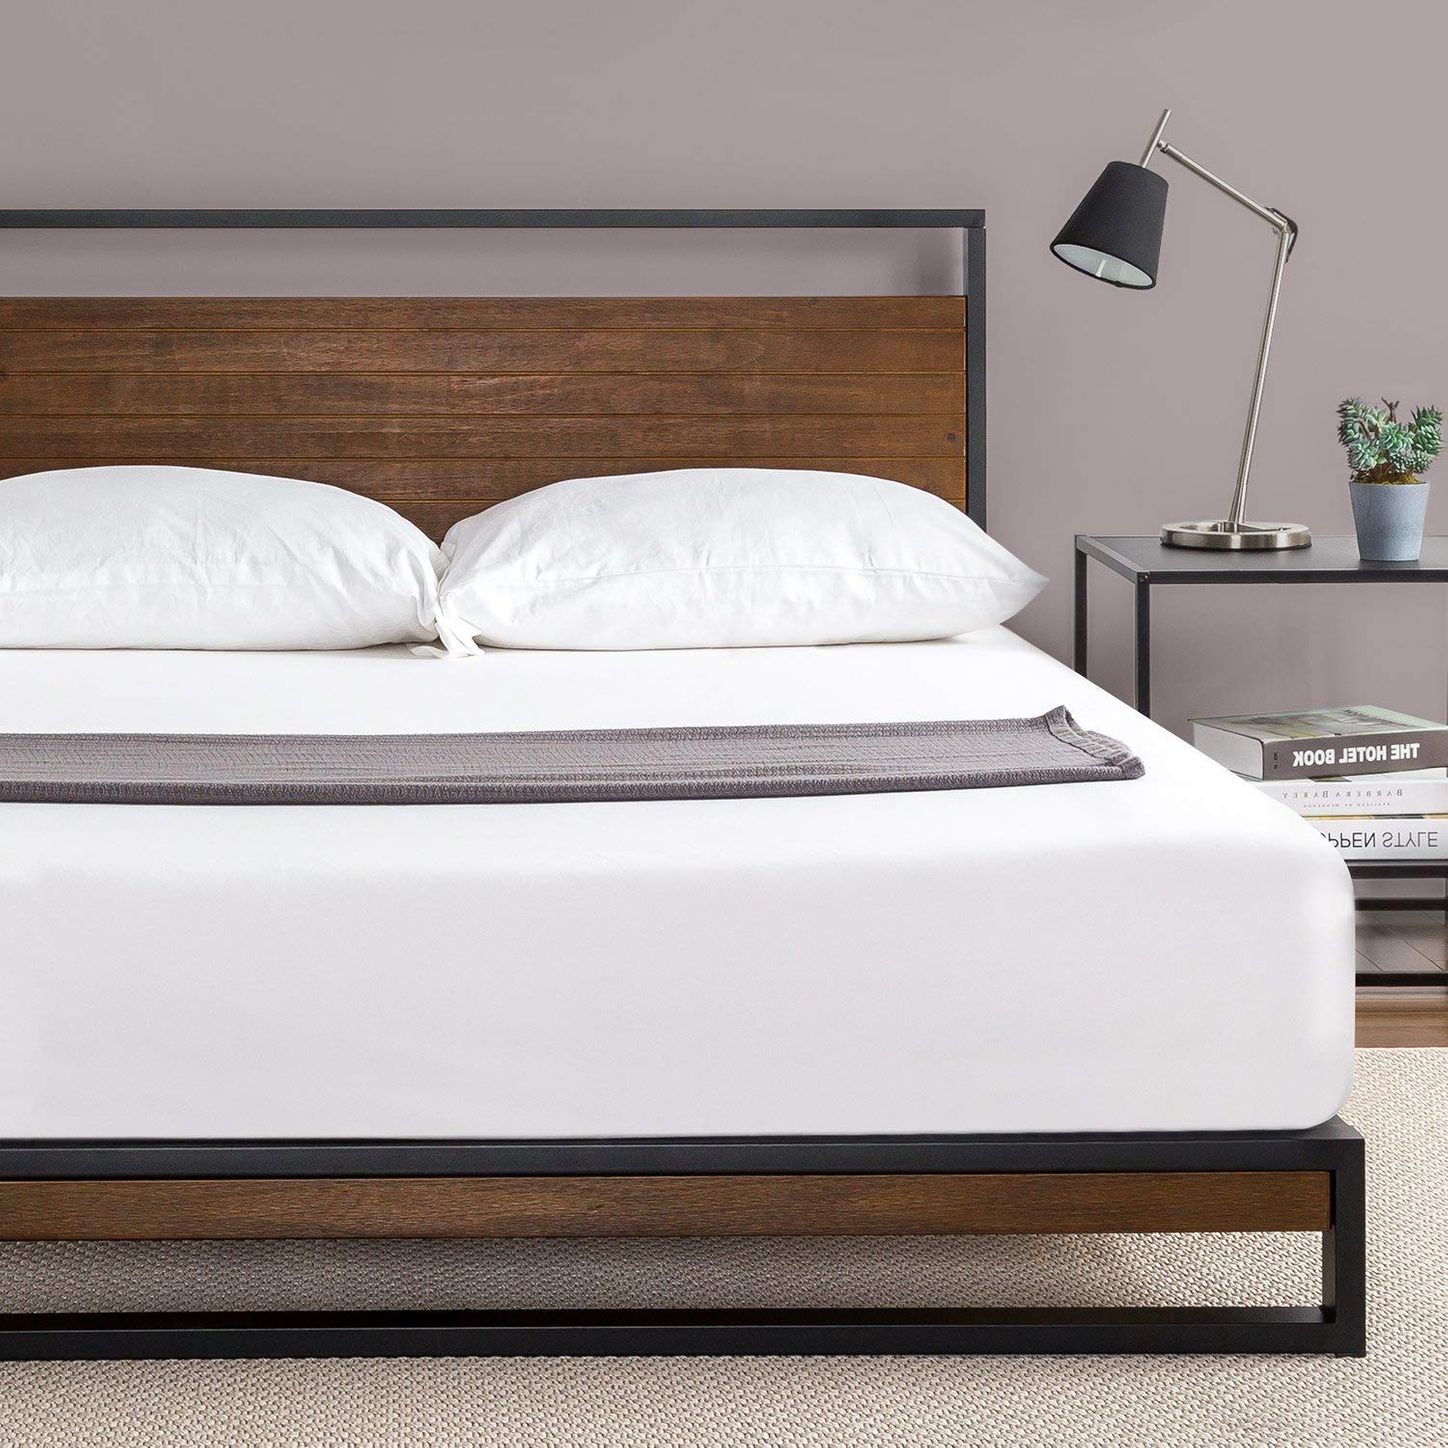 19 Best Metal Bed Frames 2020 The, Which Bed Frame Is The Strongest In World